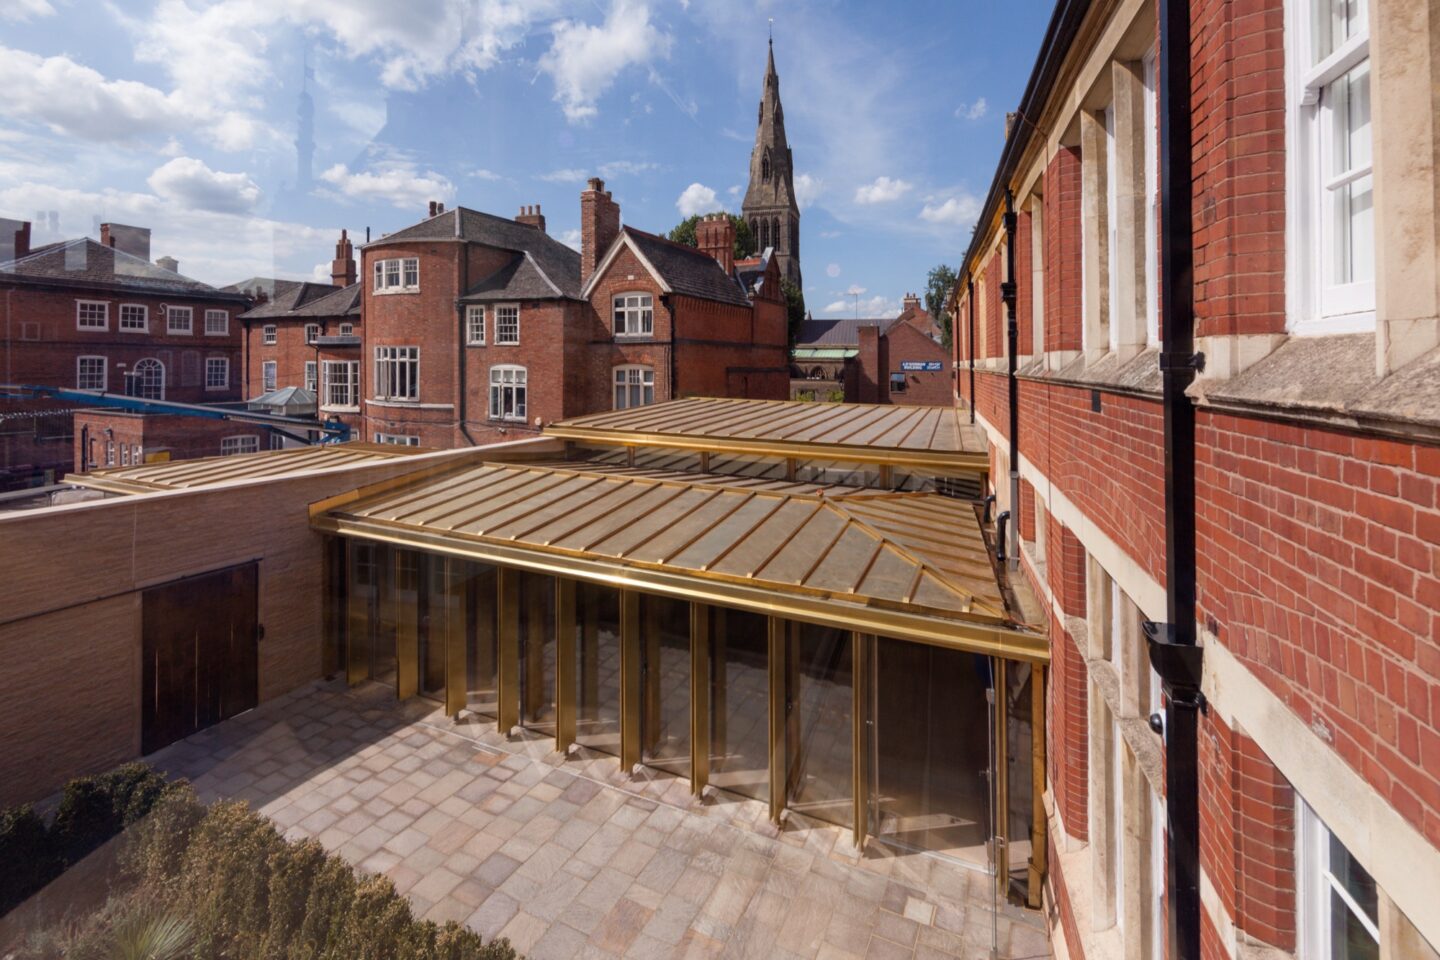 King Richard III Visitor Centre, Leicester